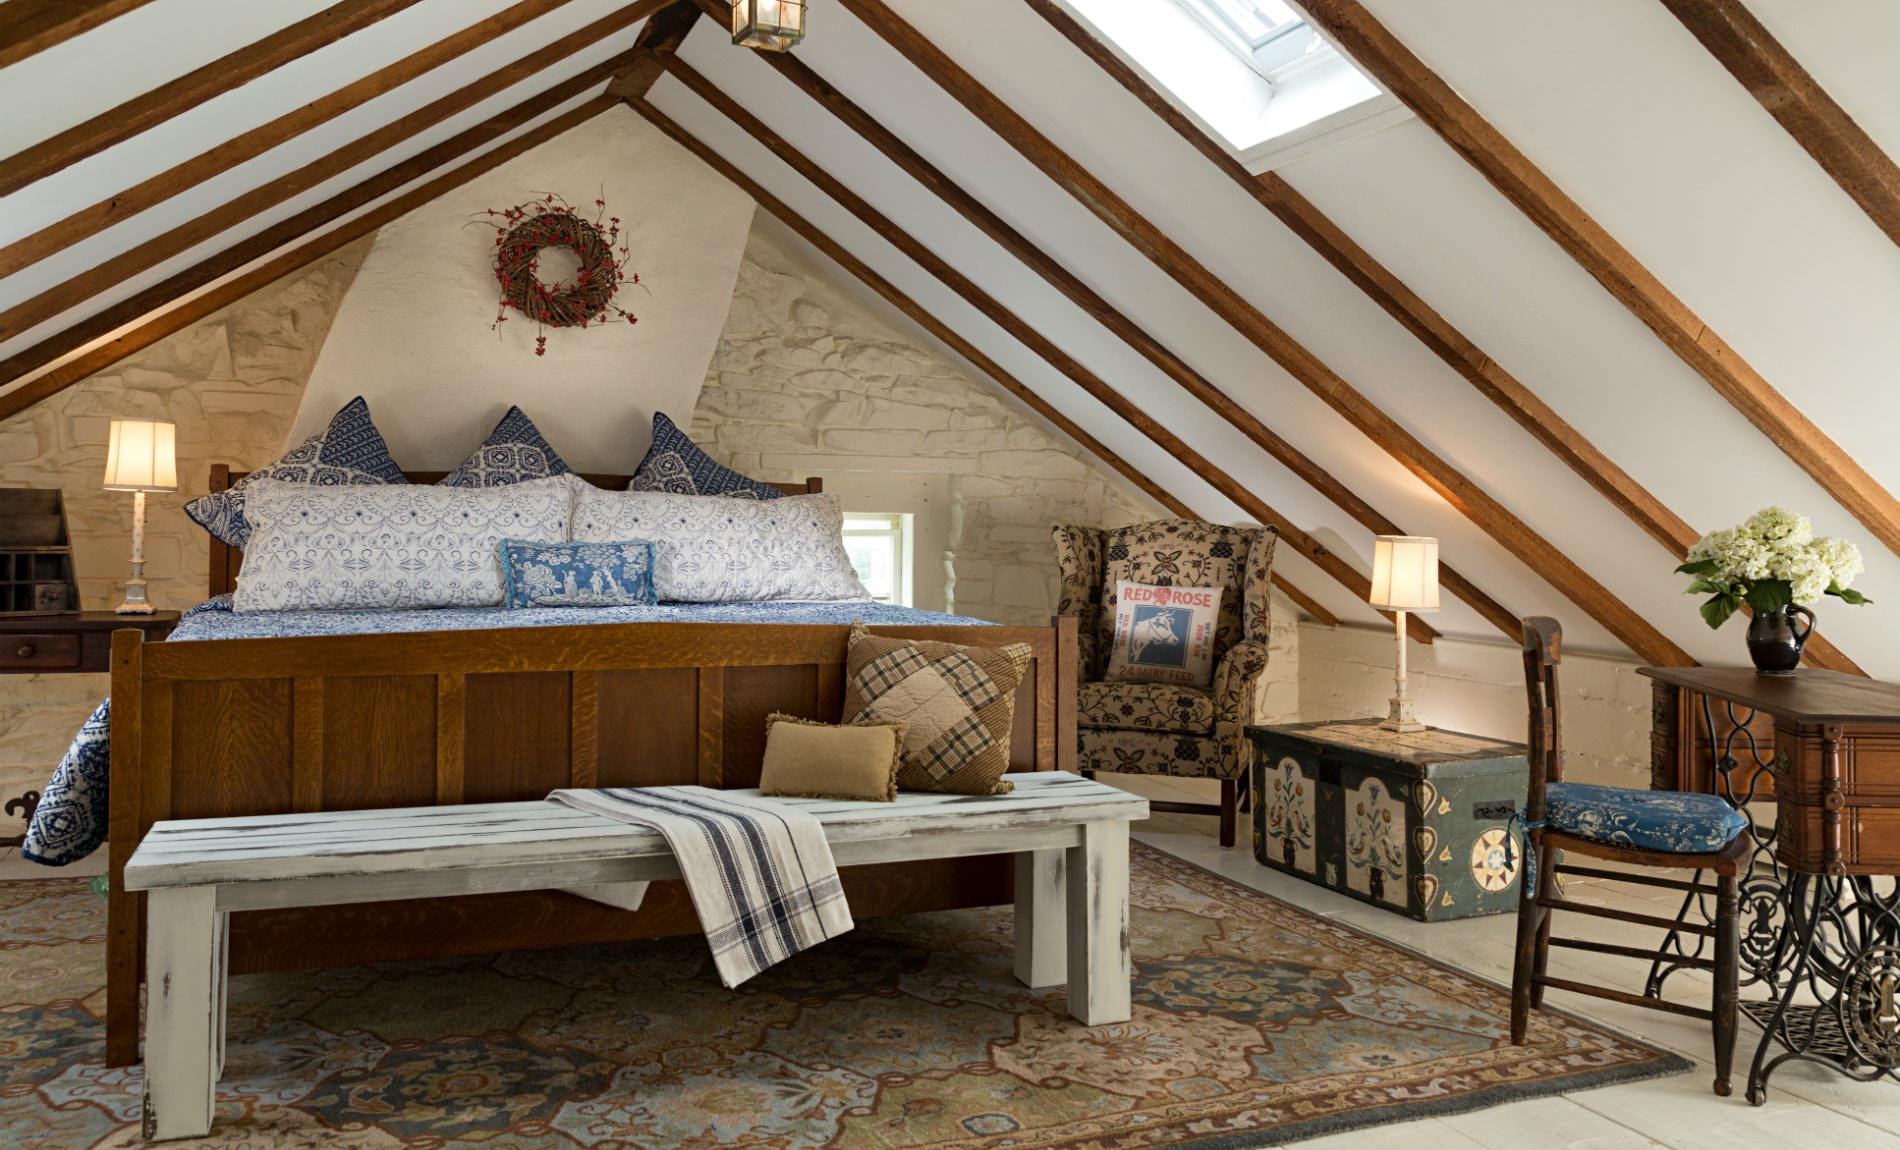 Vaulted attic room with one white stone wall, large wood bed with blue and white bedding, and wood floors